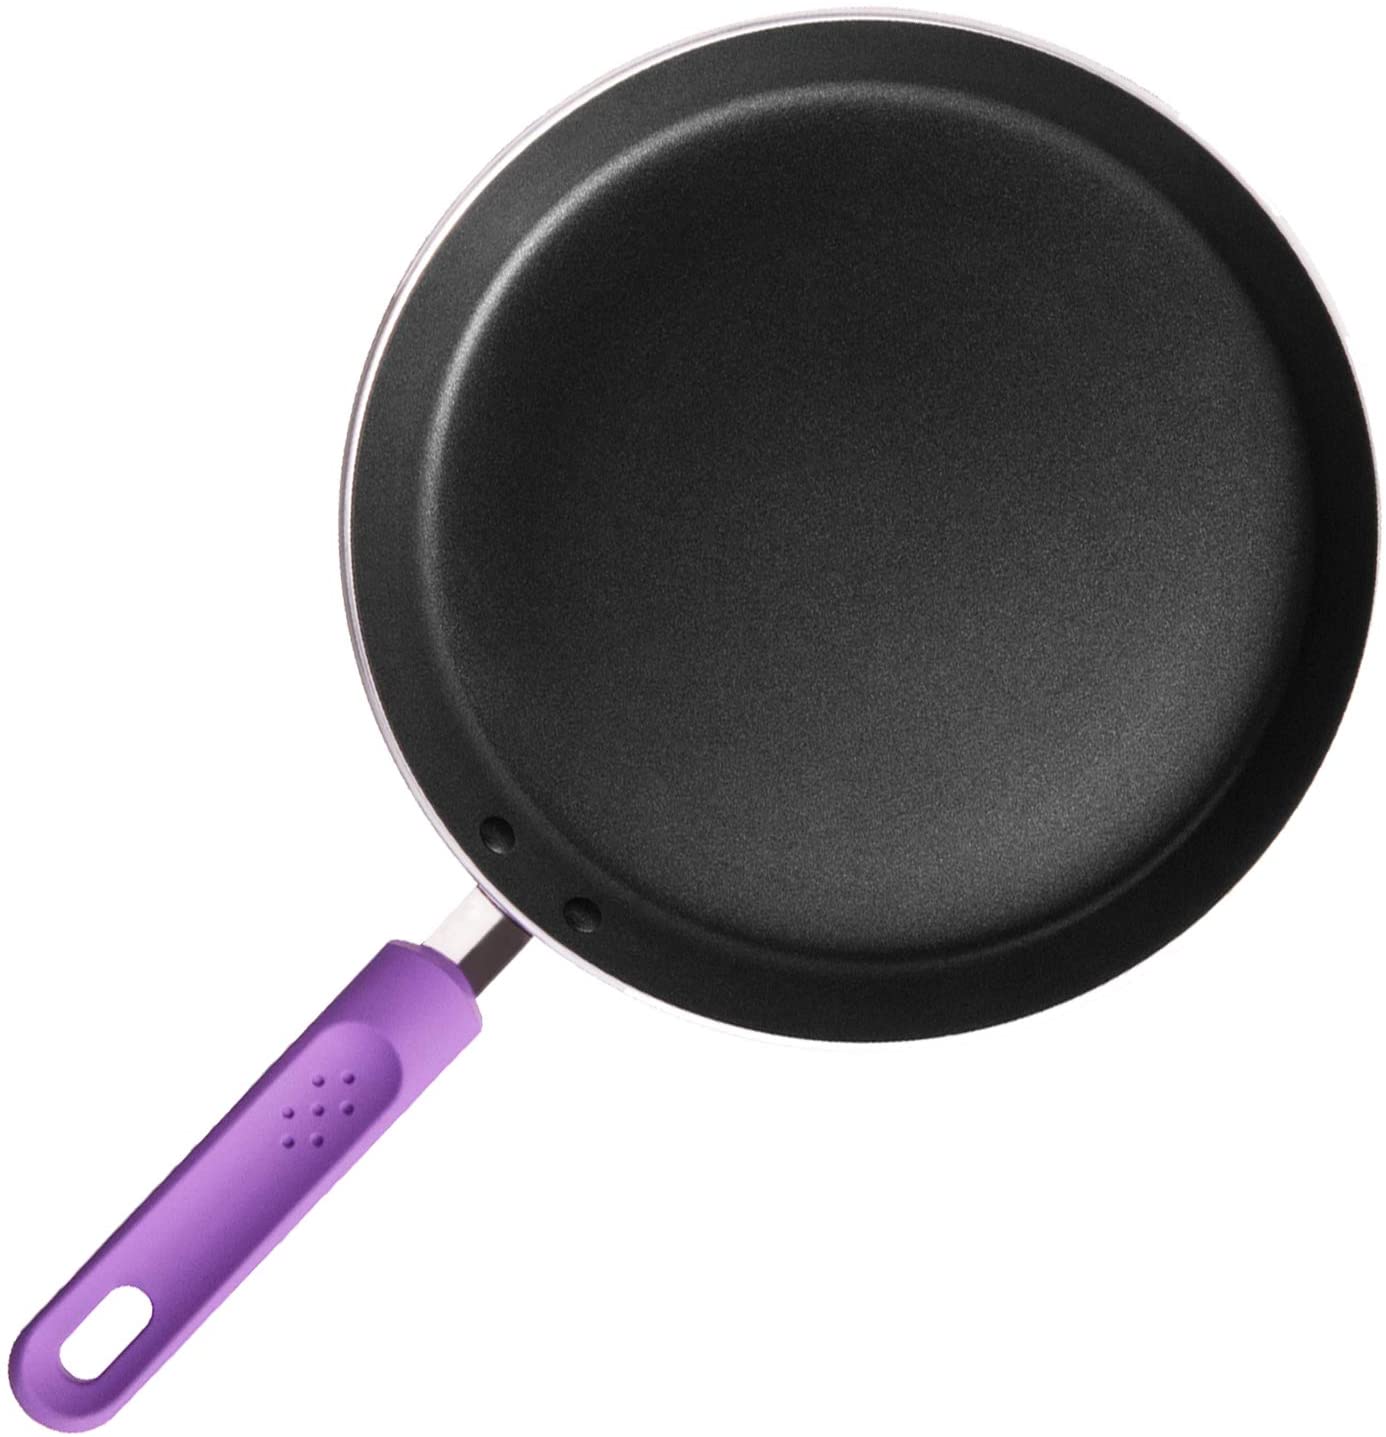 ROCKURWOK 8-inch ceramic non-stick frying pan $60 after 14